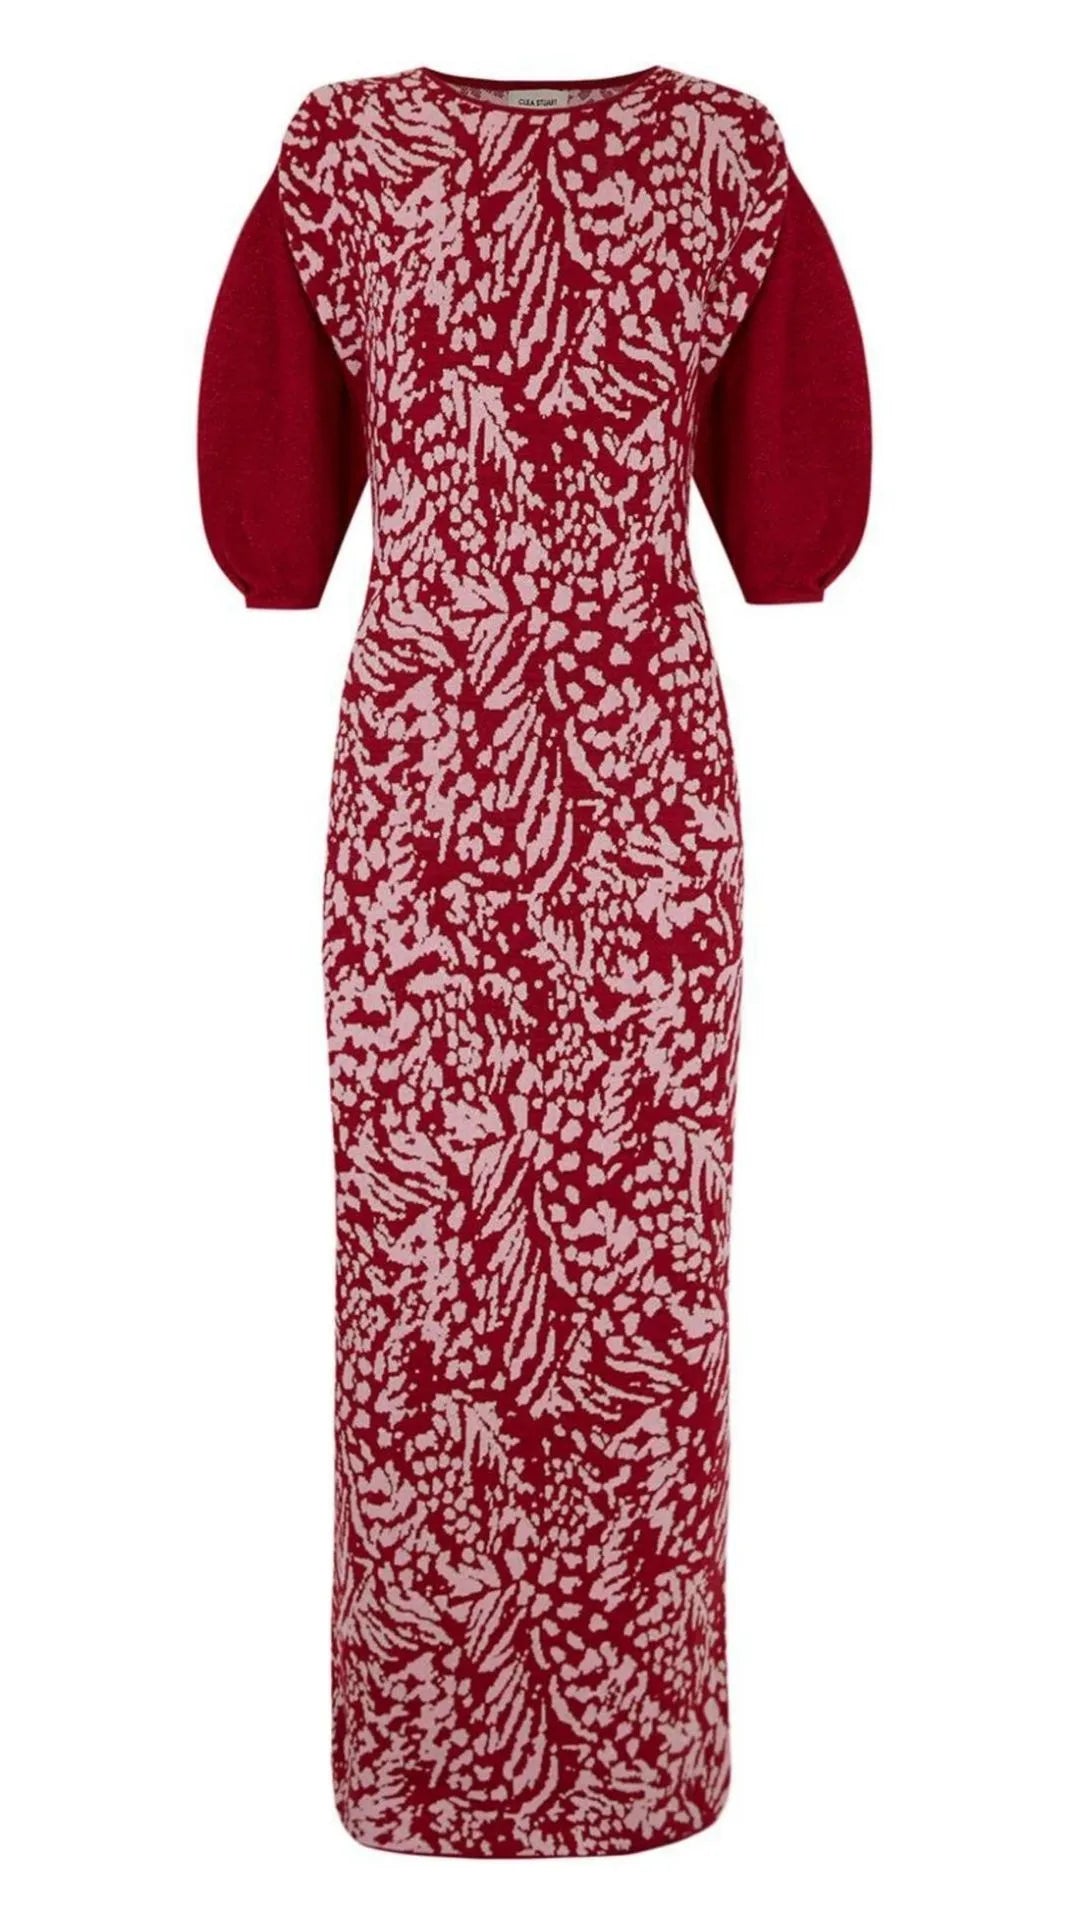 Clea Stuart Carmesi Feathers Dress. Luxury knitwear dress in burgundy and pink. The dress features mid length balloon sleeves and is midi length. There is a subtle weave of metallic threading, giving the dress an elegant look. Product photo shown from the front view.